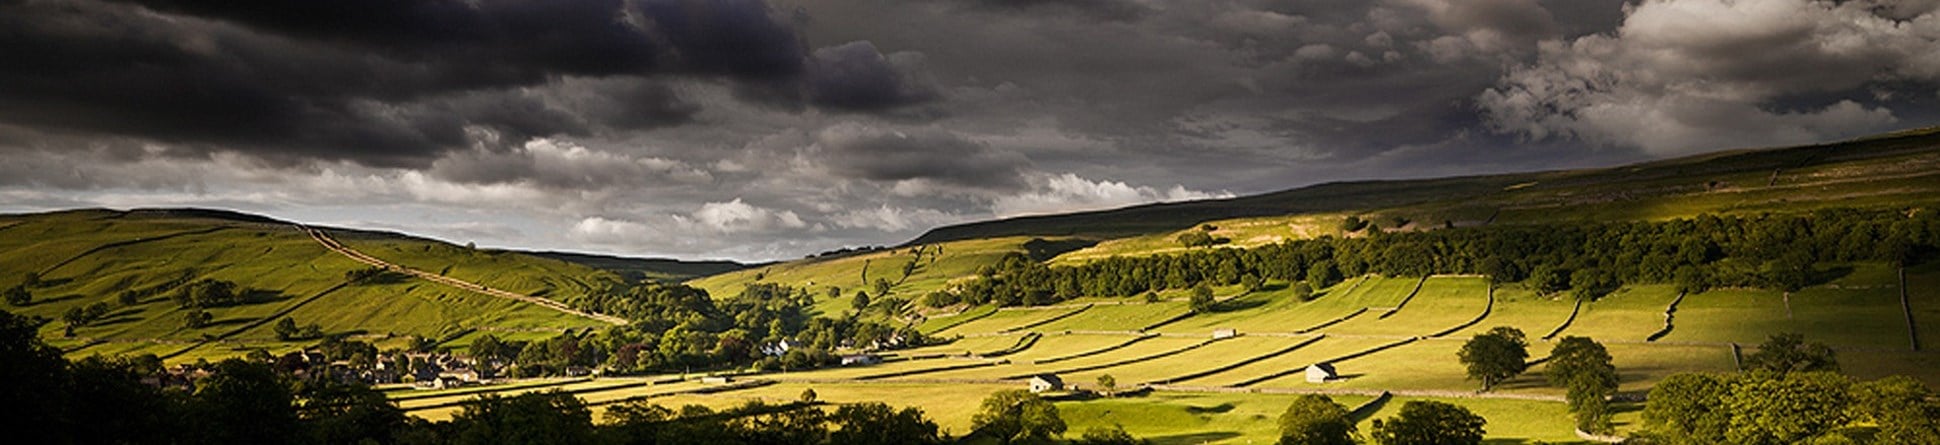 Field barns in the landscape of the Yorkshire Dales National Park